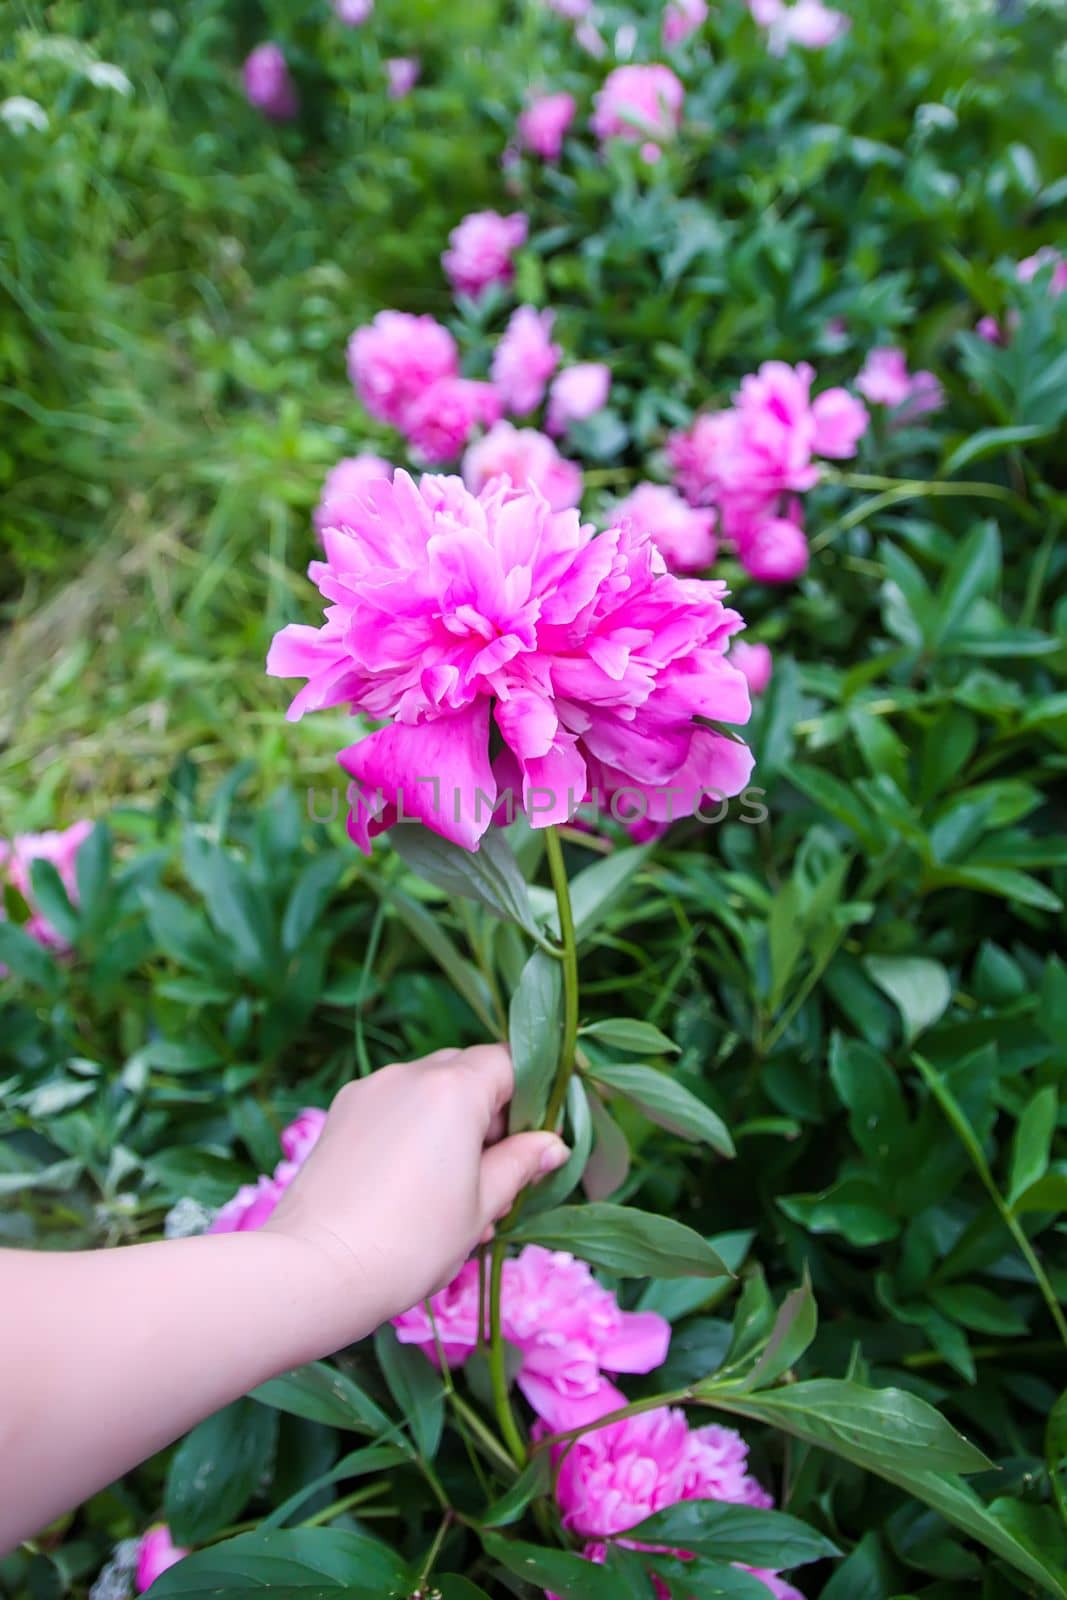 Pink peony flowers in a hand by nightlyviolet